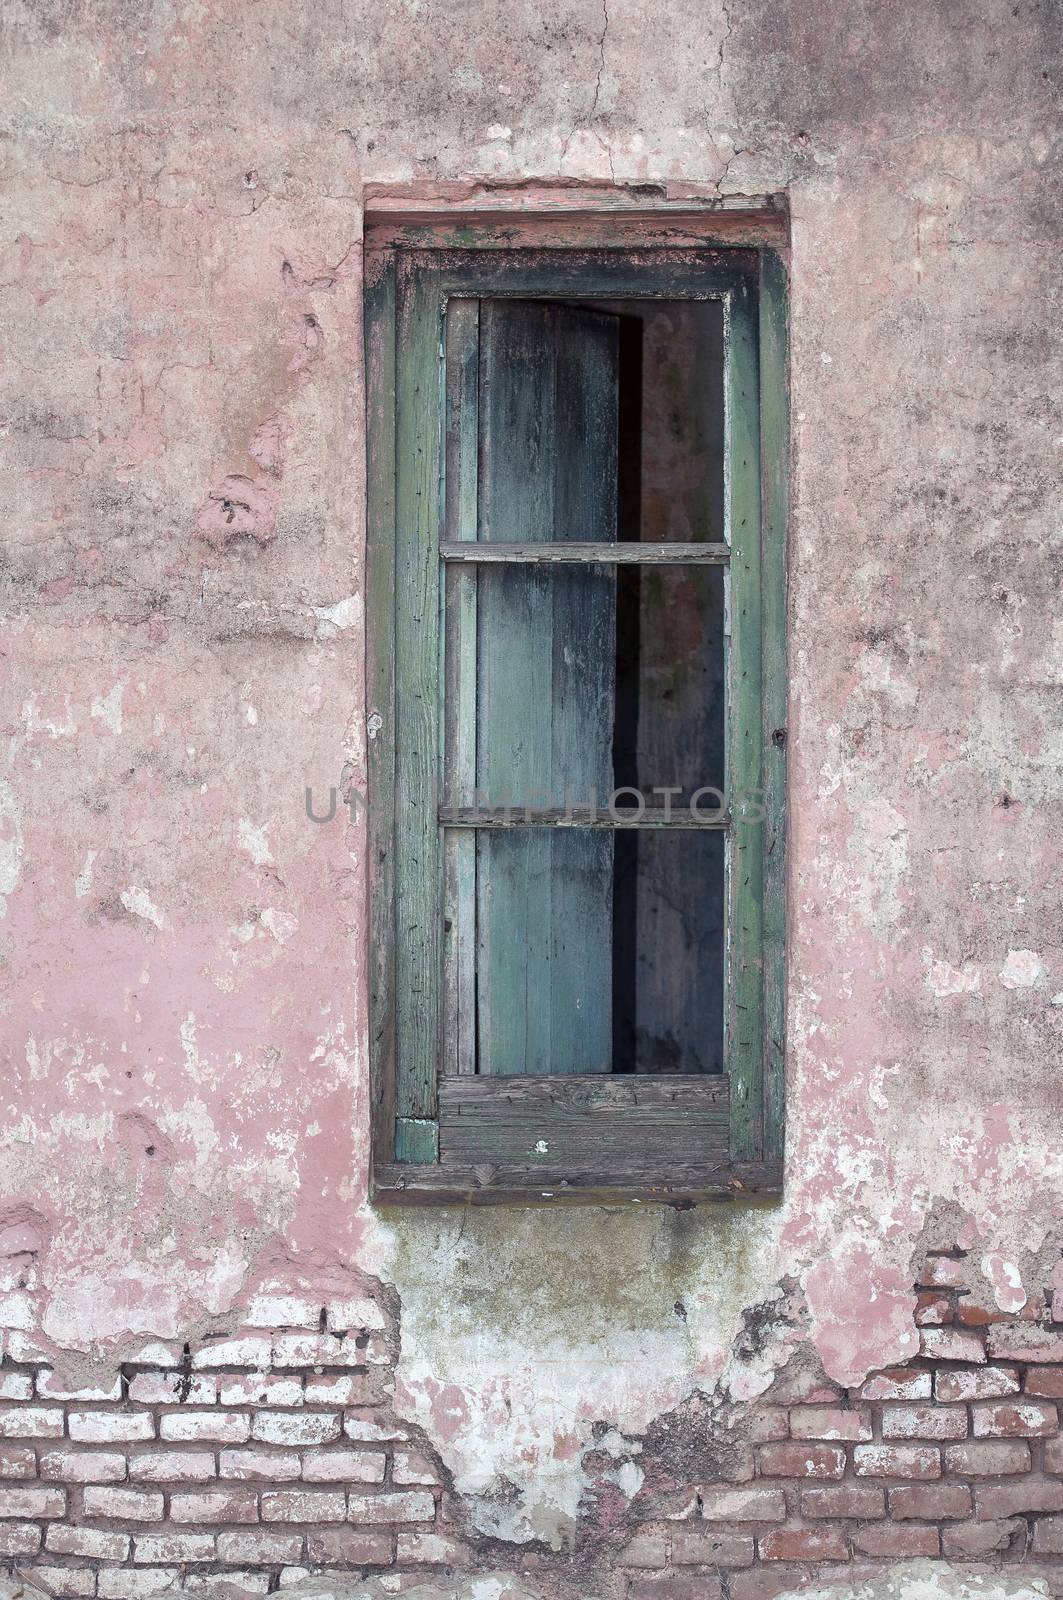 Stock image of an old window on exposed brick wall.